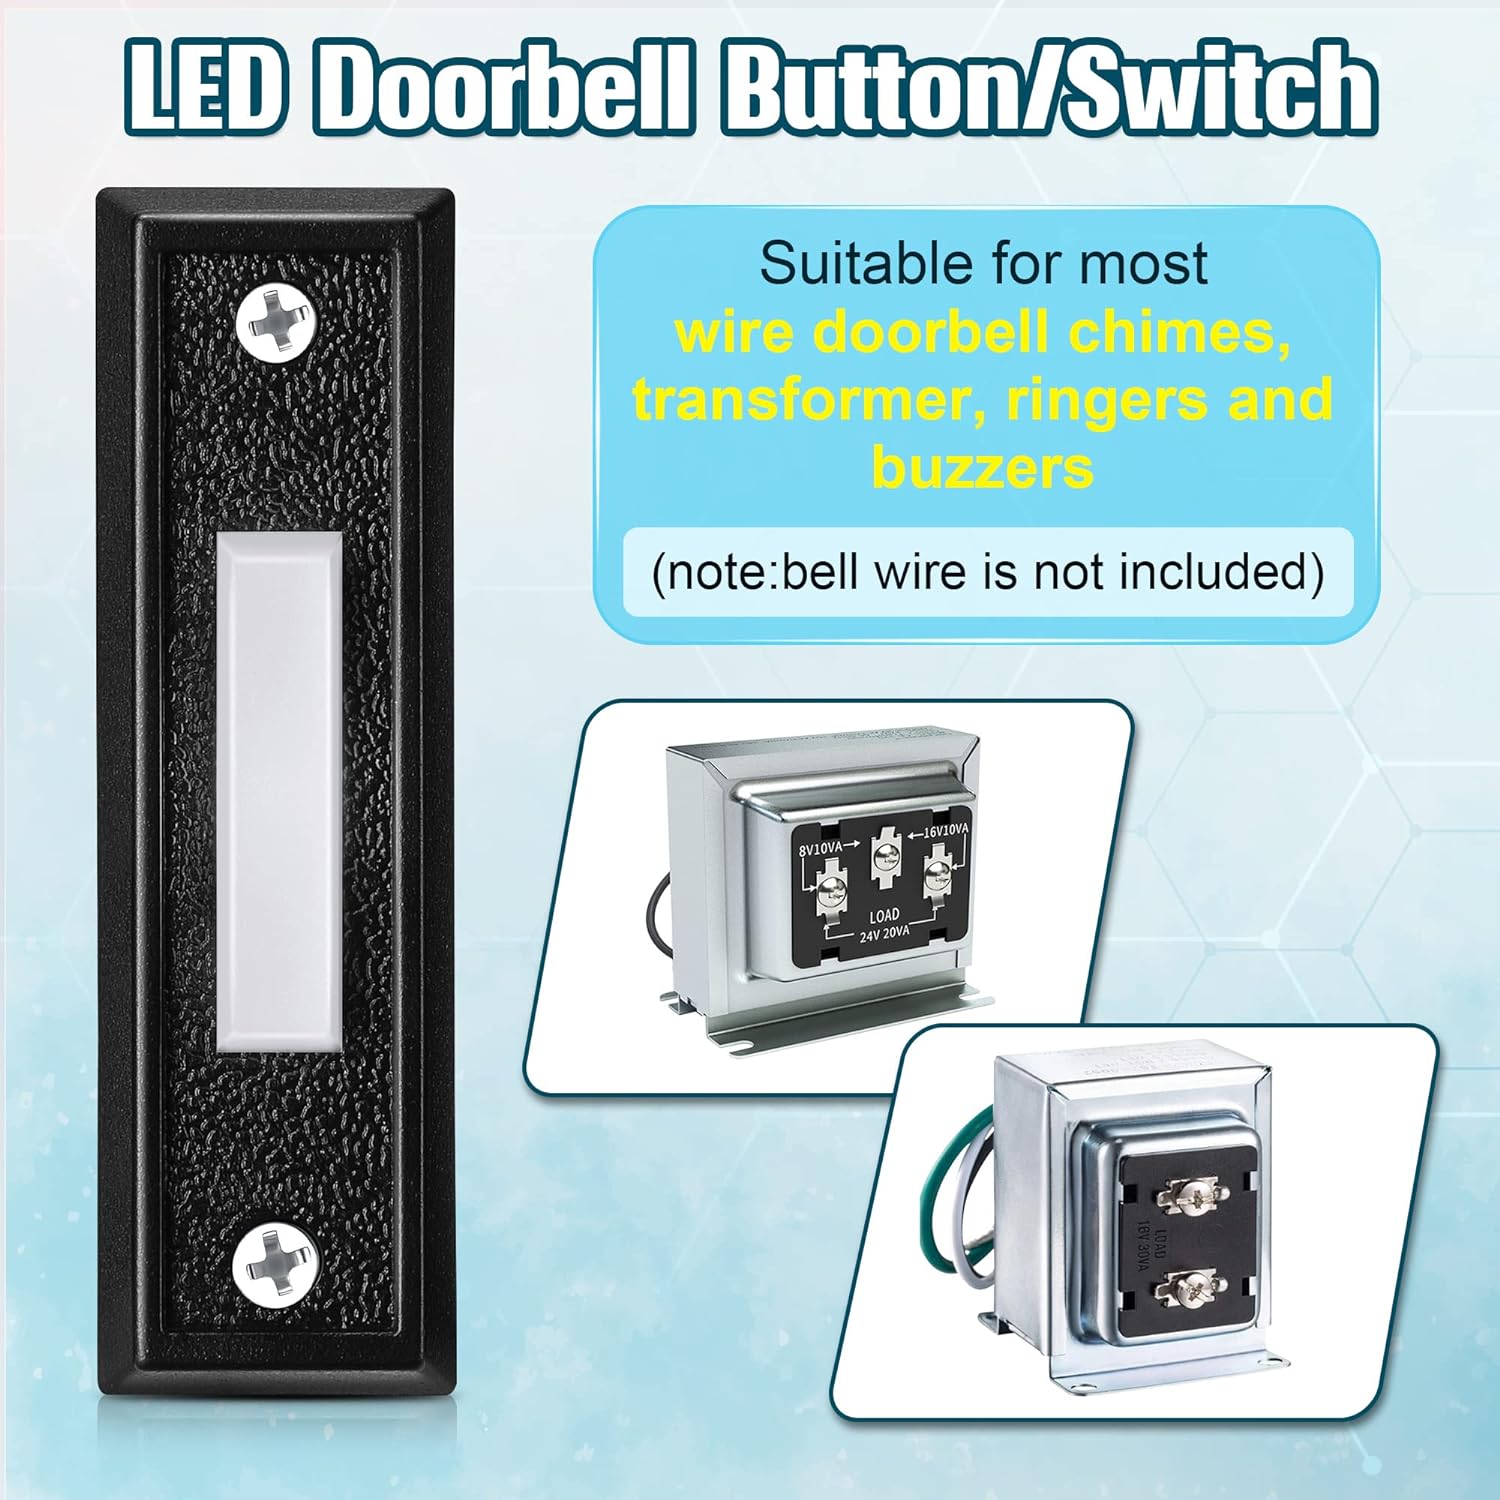 Saillong Cool White Doorbell Button, Lighted Wired Door Bell Push Buttons LED Door Chime, Wall Mounted Door Opener Switch (Black, 1 Pack)